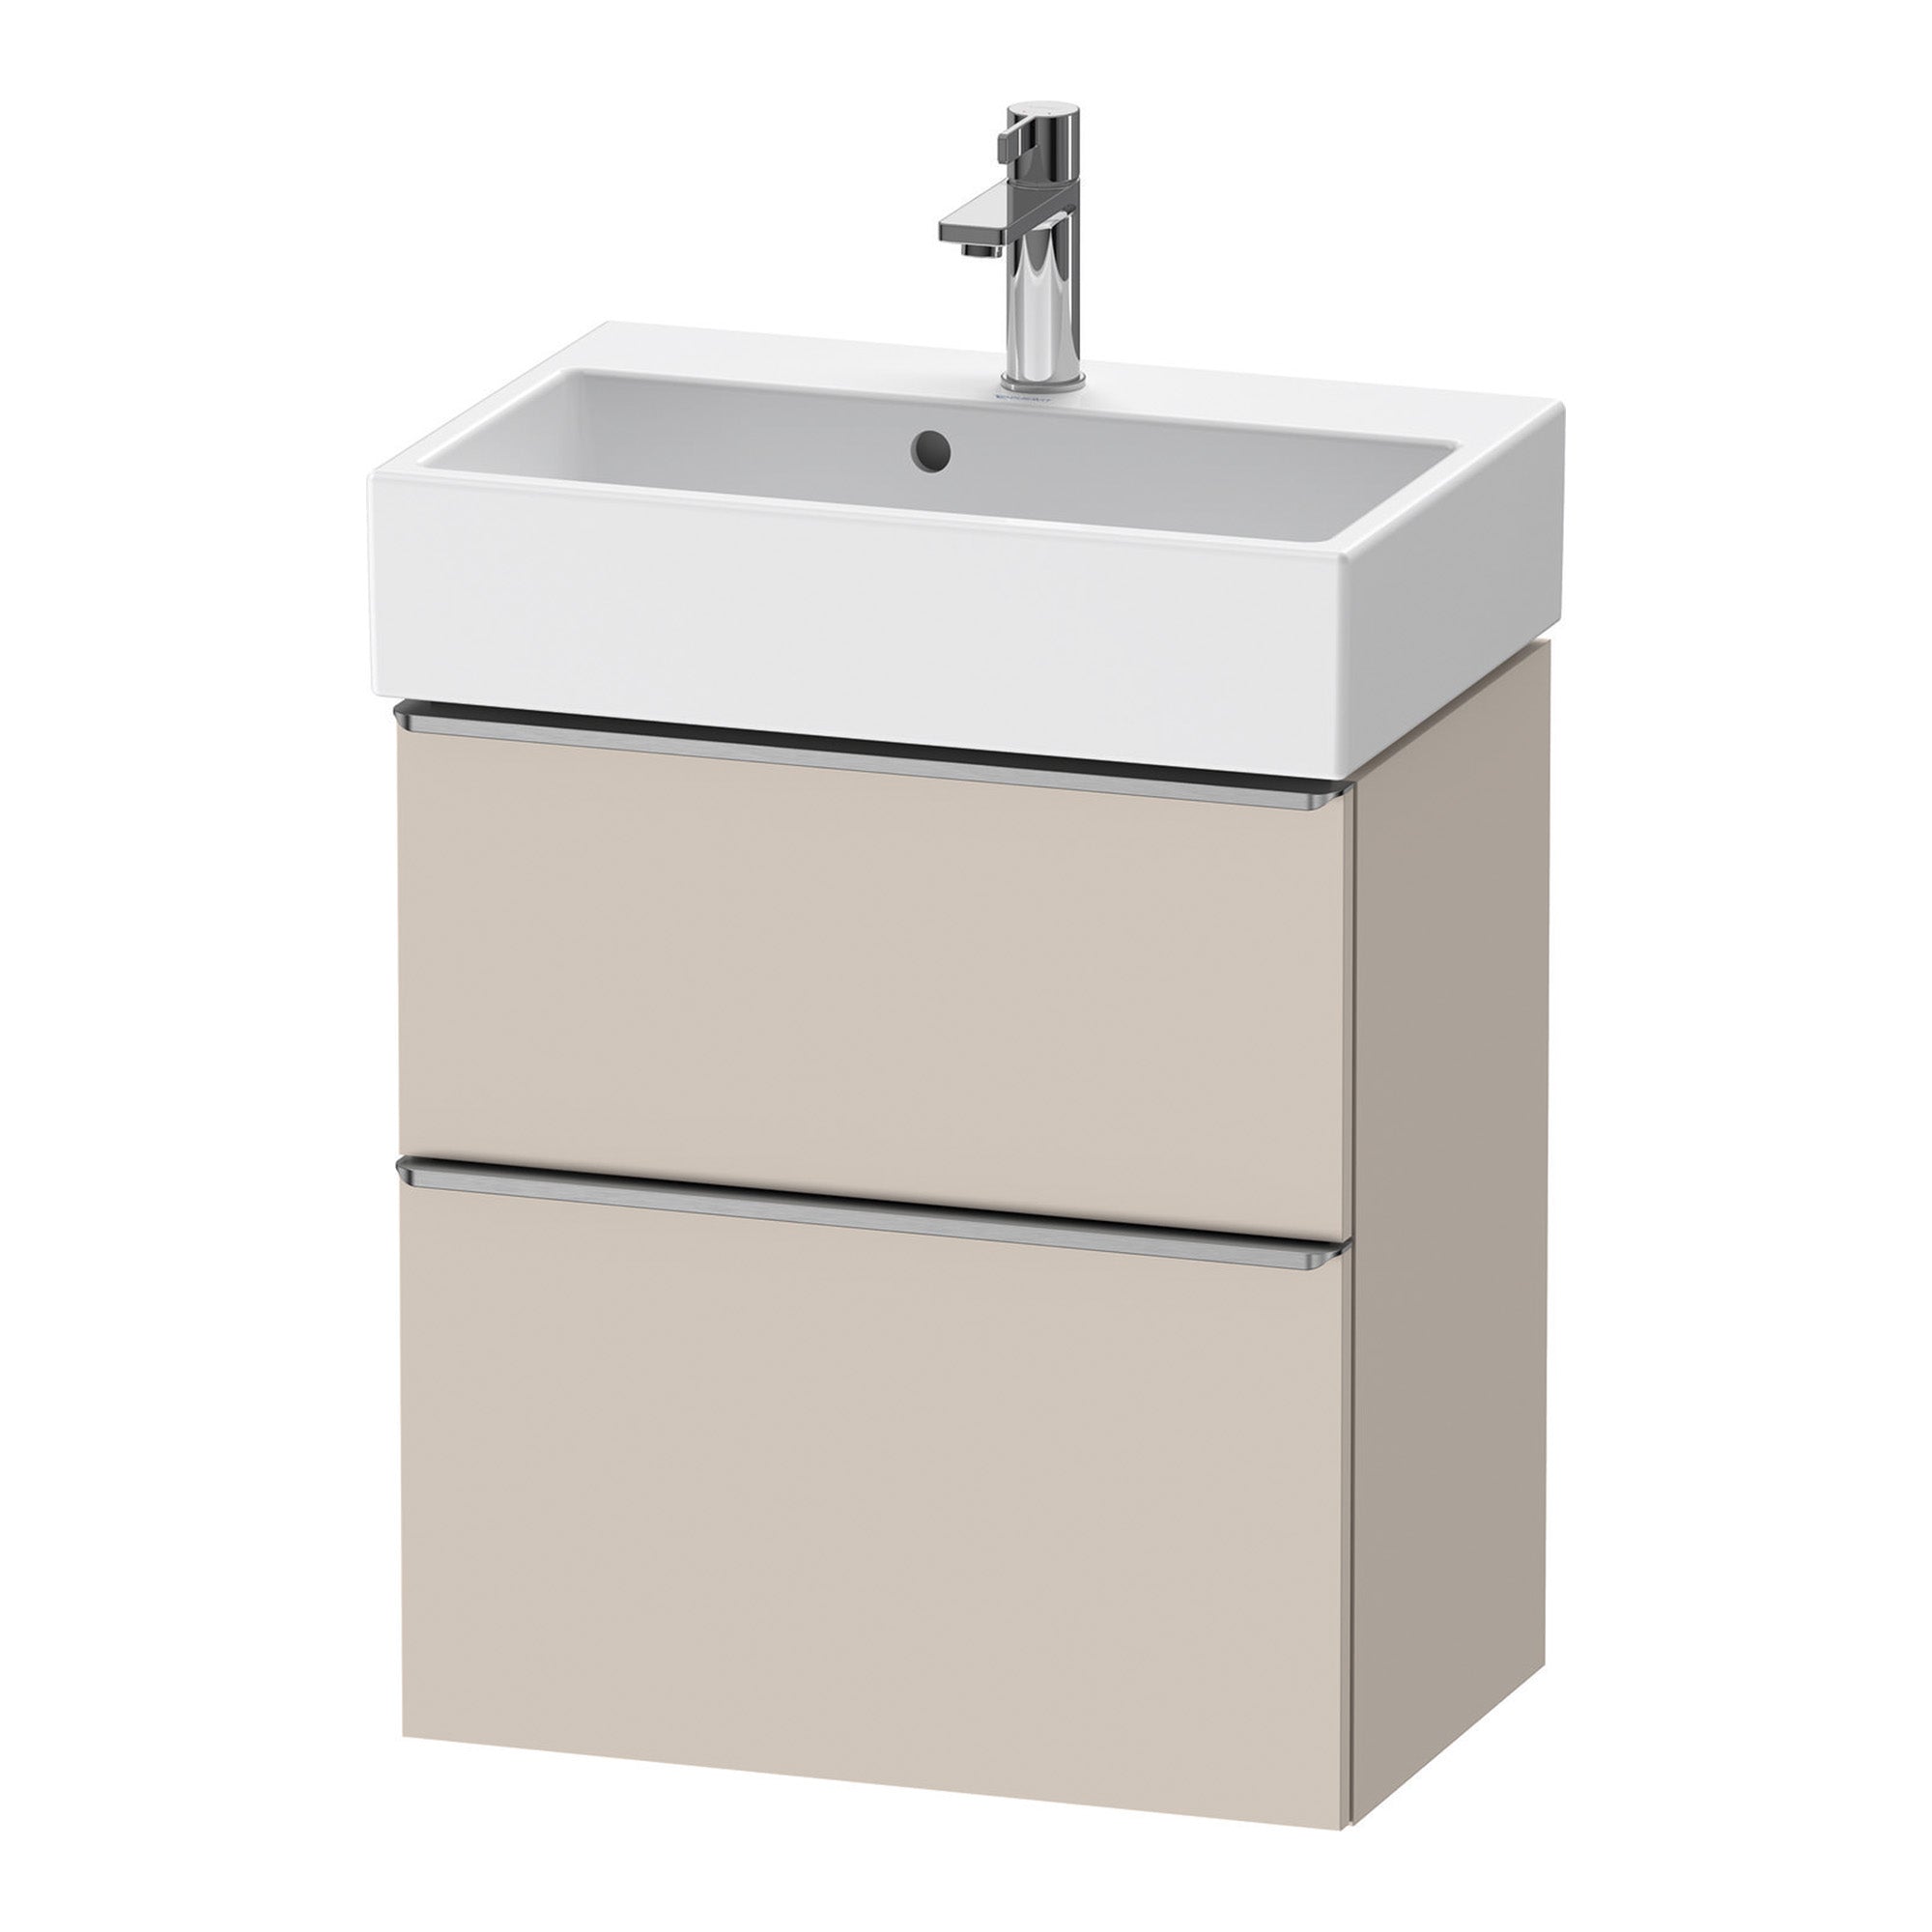 duravit d-neo 600 wall mounted vanity unit with vero basin taupe stainless steel handles